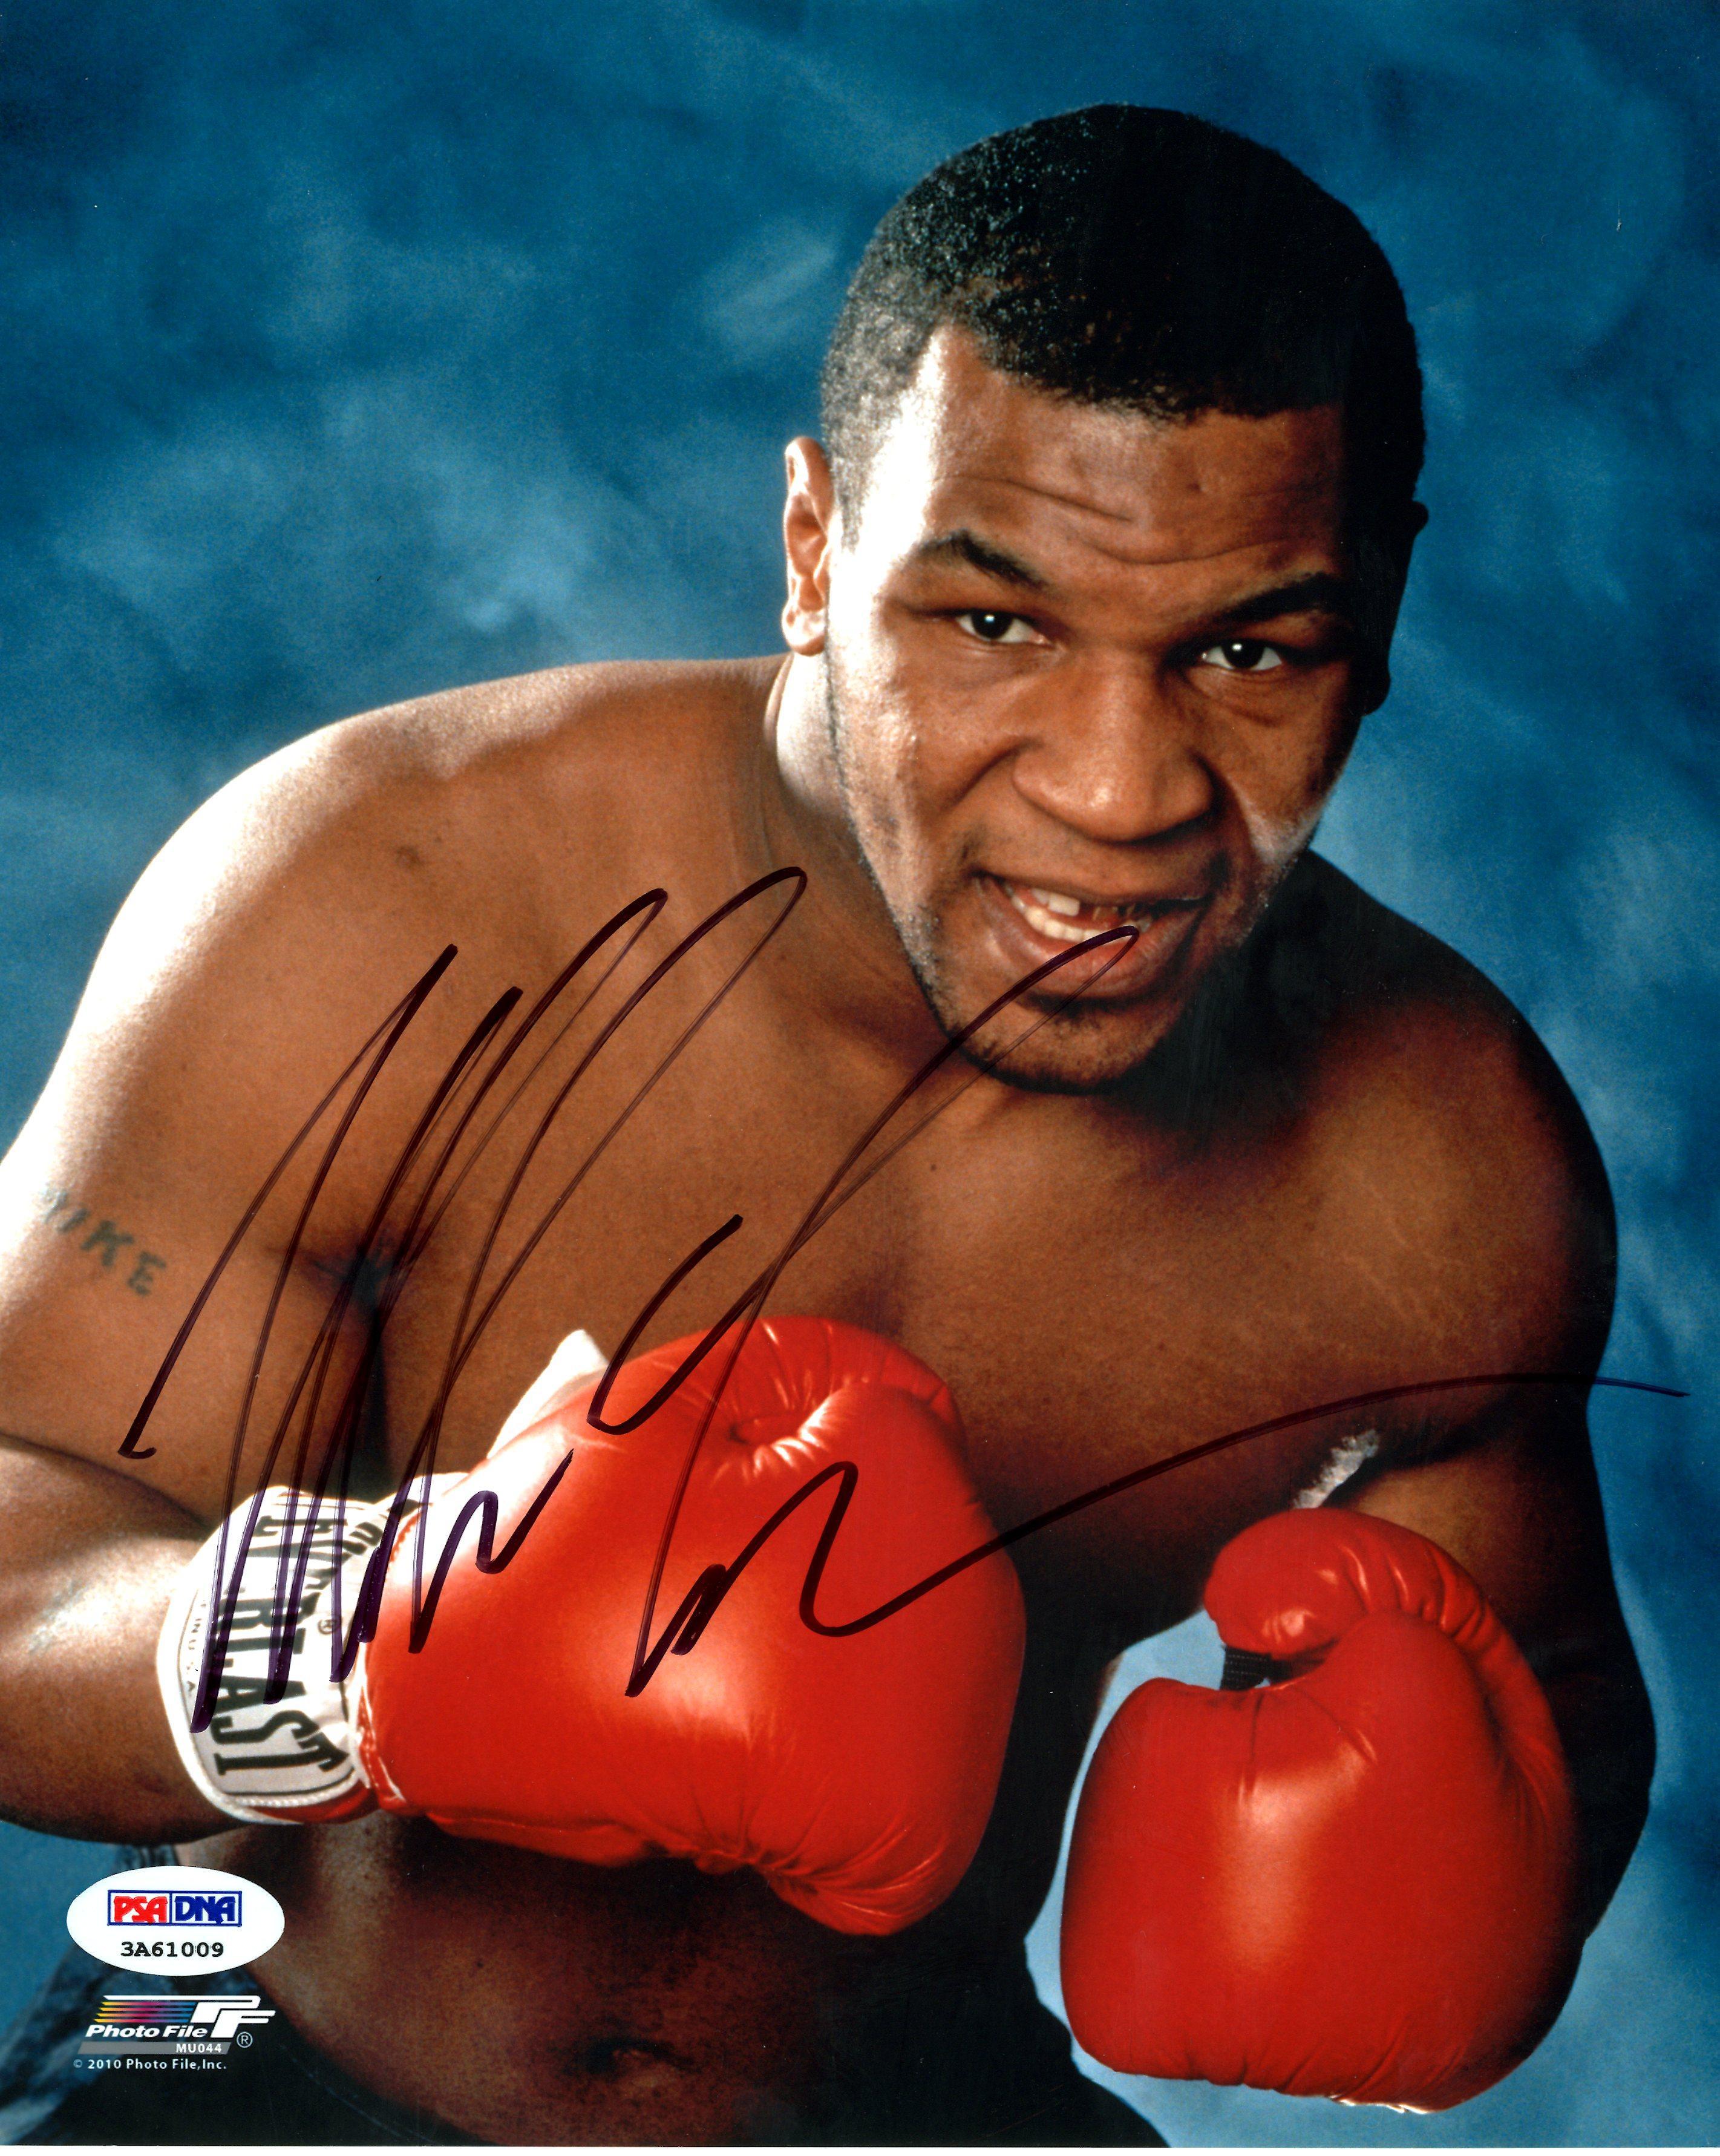 Mike Tyson Wallpaper 4k APK (Android App) - Free Download